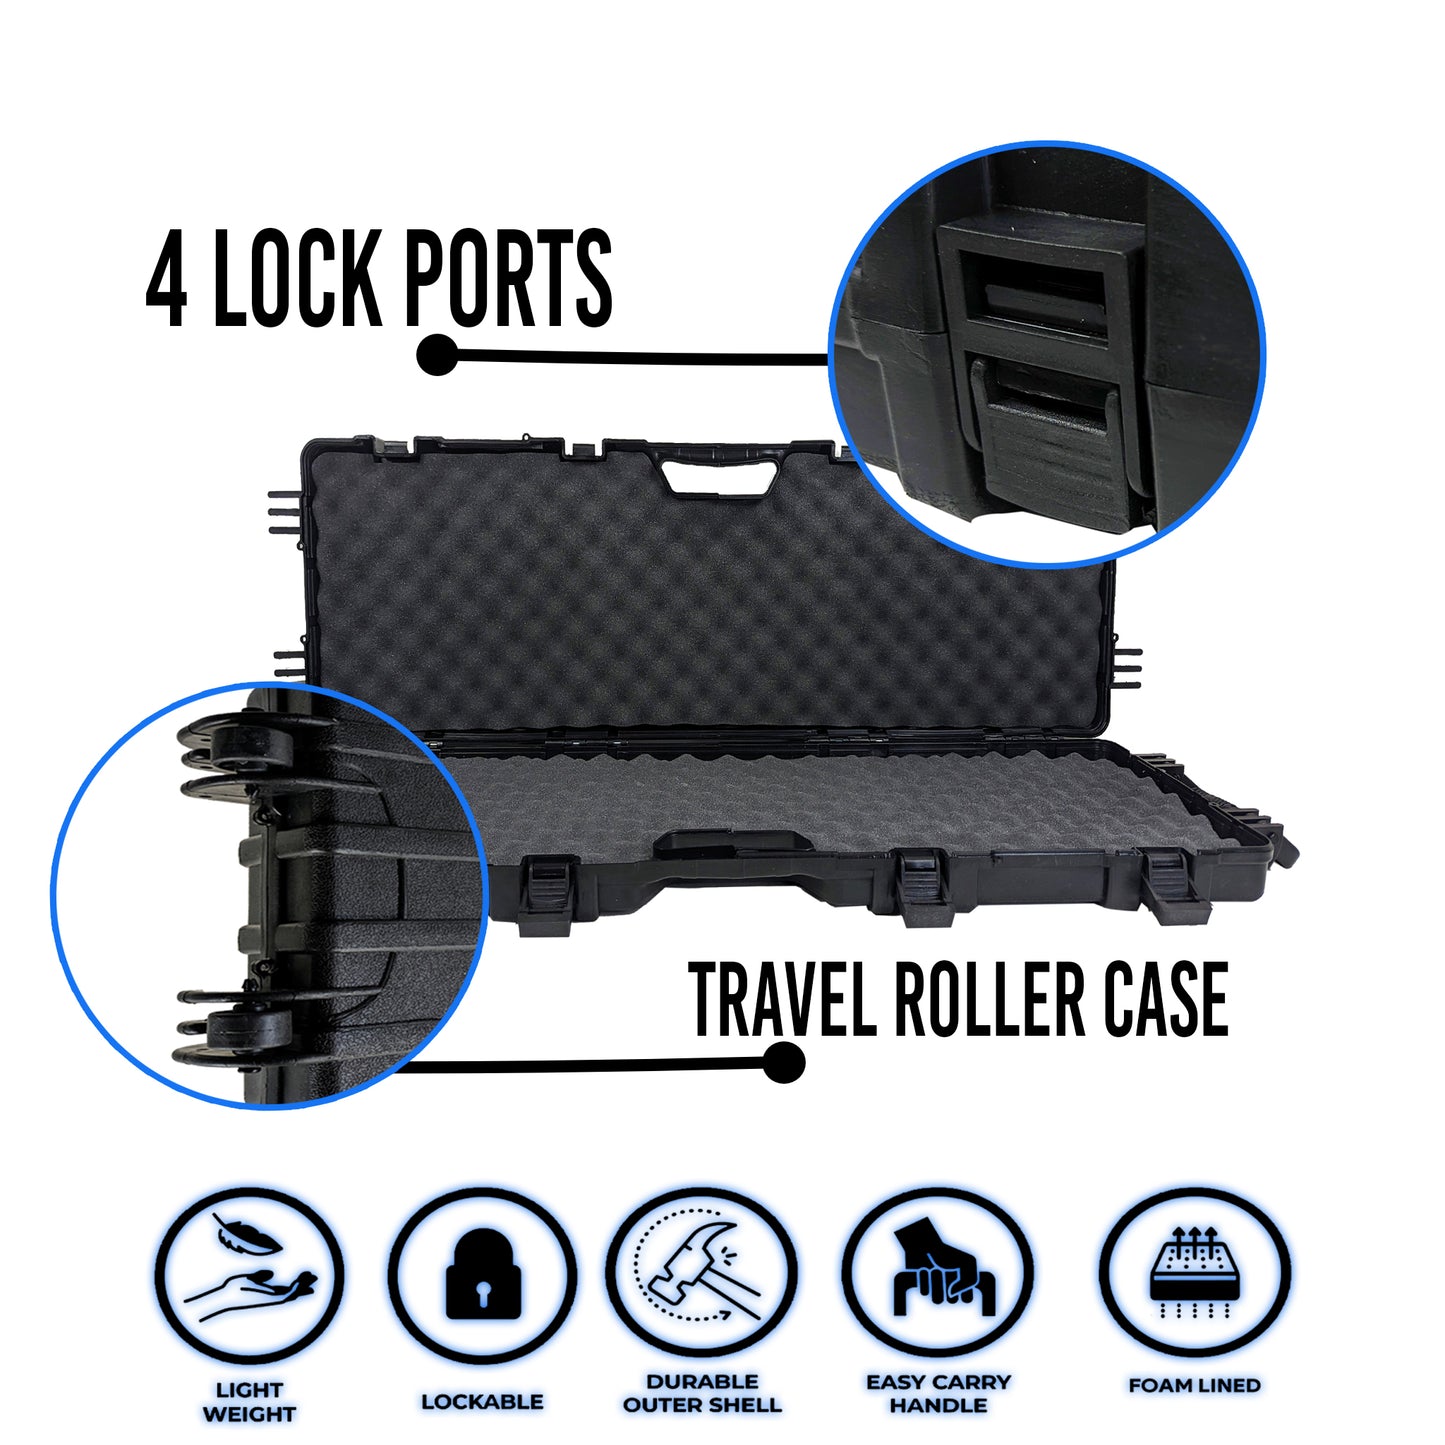 Emperor Arms 38.5" Hard Rifle Gun Case, Long Lockable Storage Box, Plastic Travel Case, Protective Luggage with Foam Insert